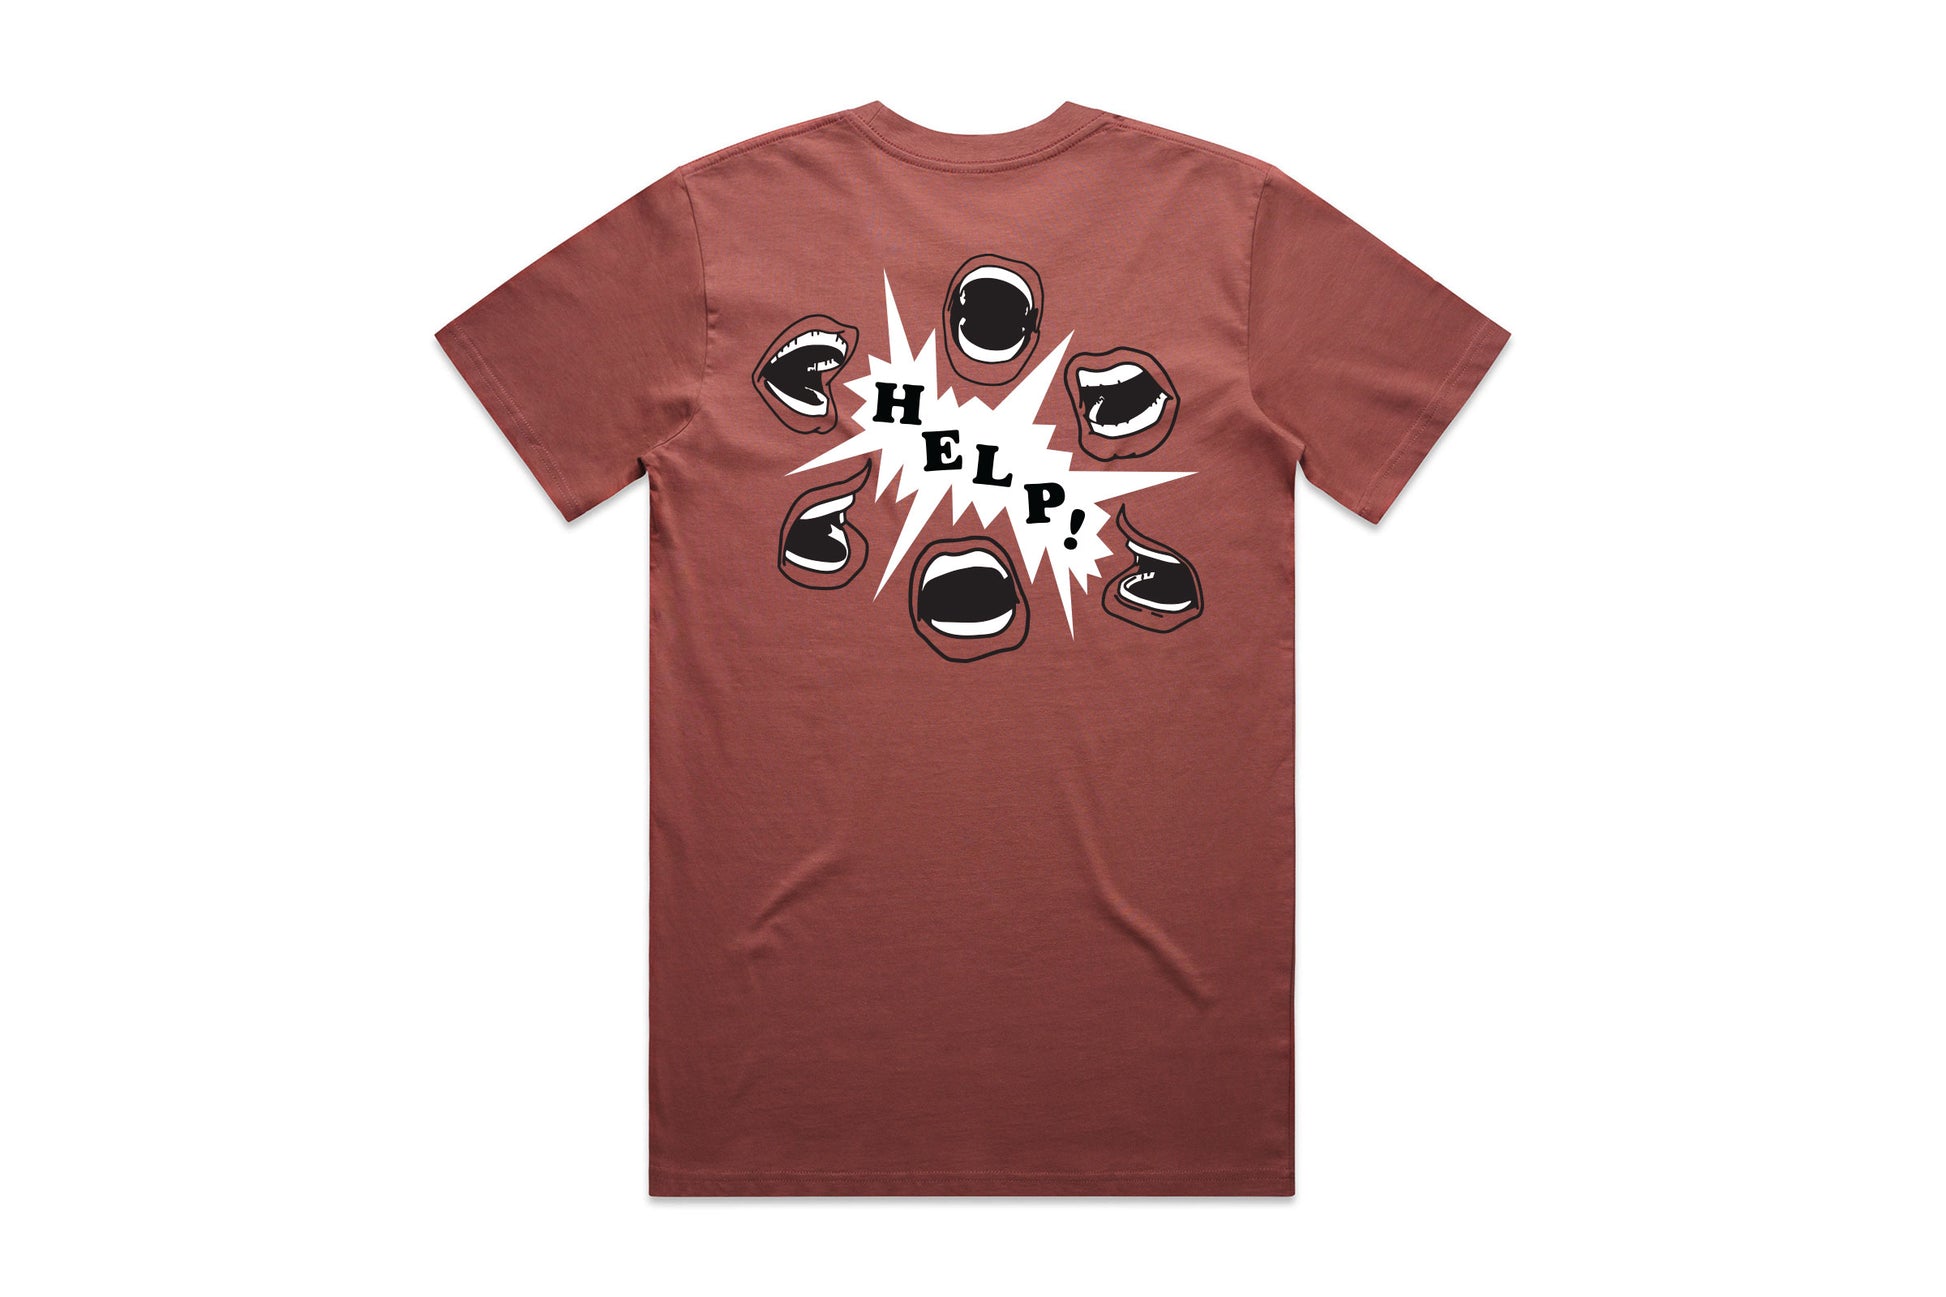 Back of T Shirt Graphic. 6 Open mouths yelling in a circle with the word "Help" in the center. Shirt is Clay colored.